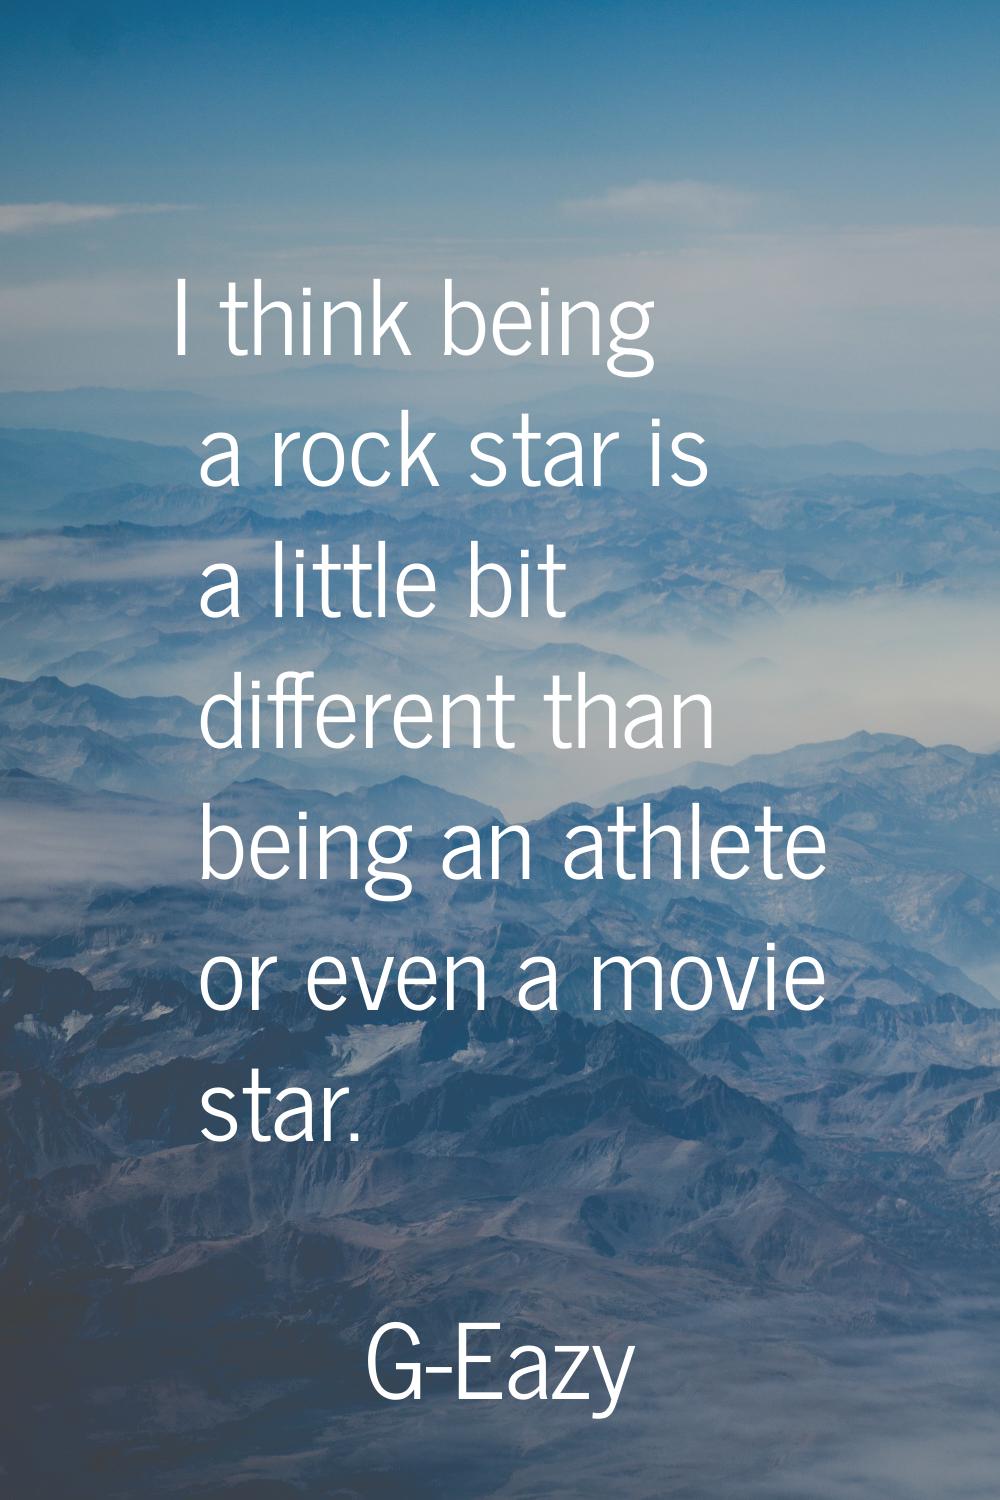 I think being a rock star is a little bit different than being an athlete or even a movie star.